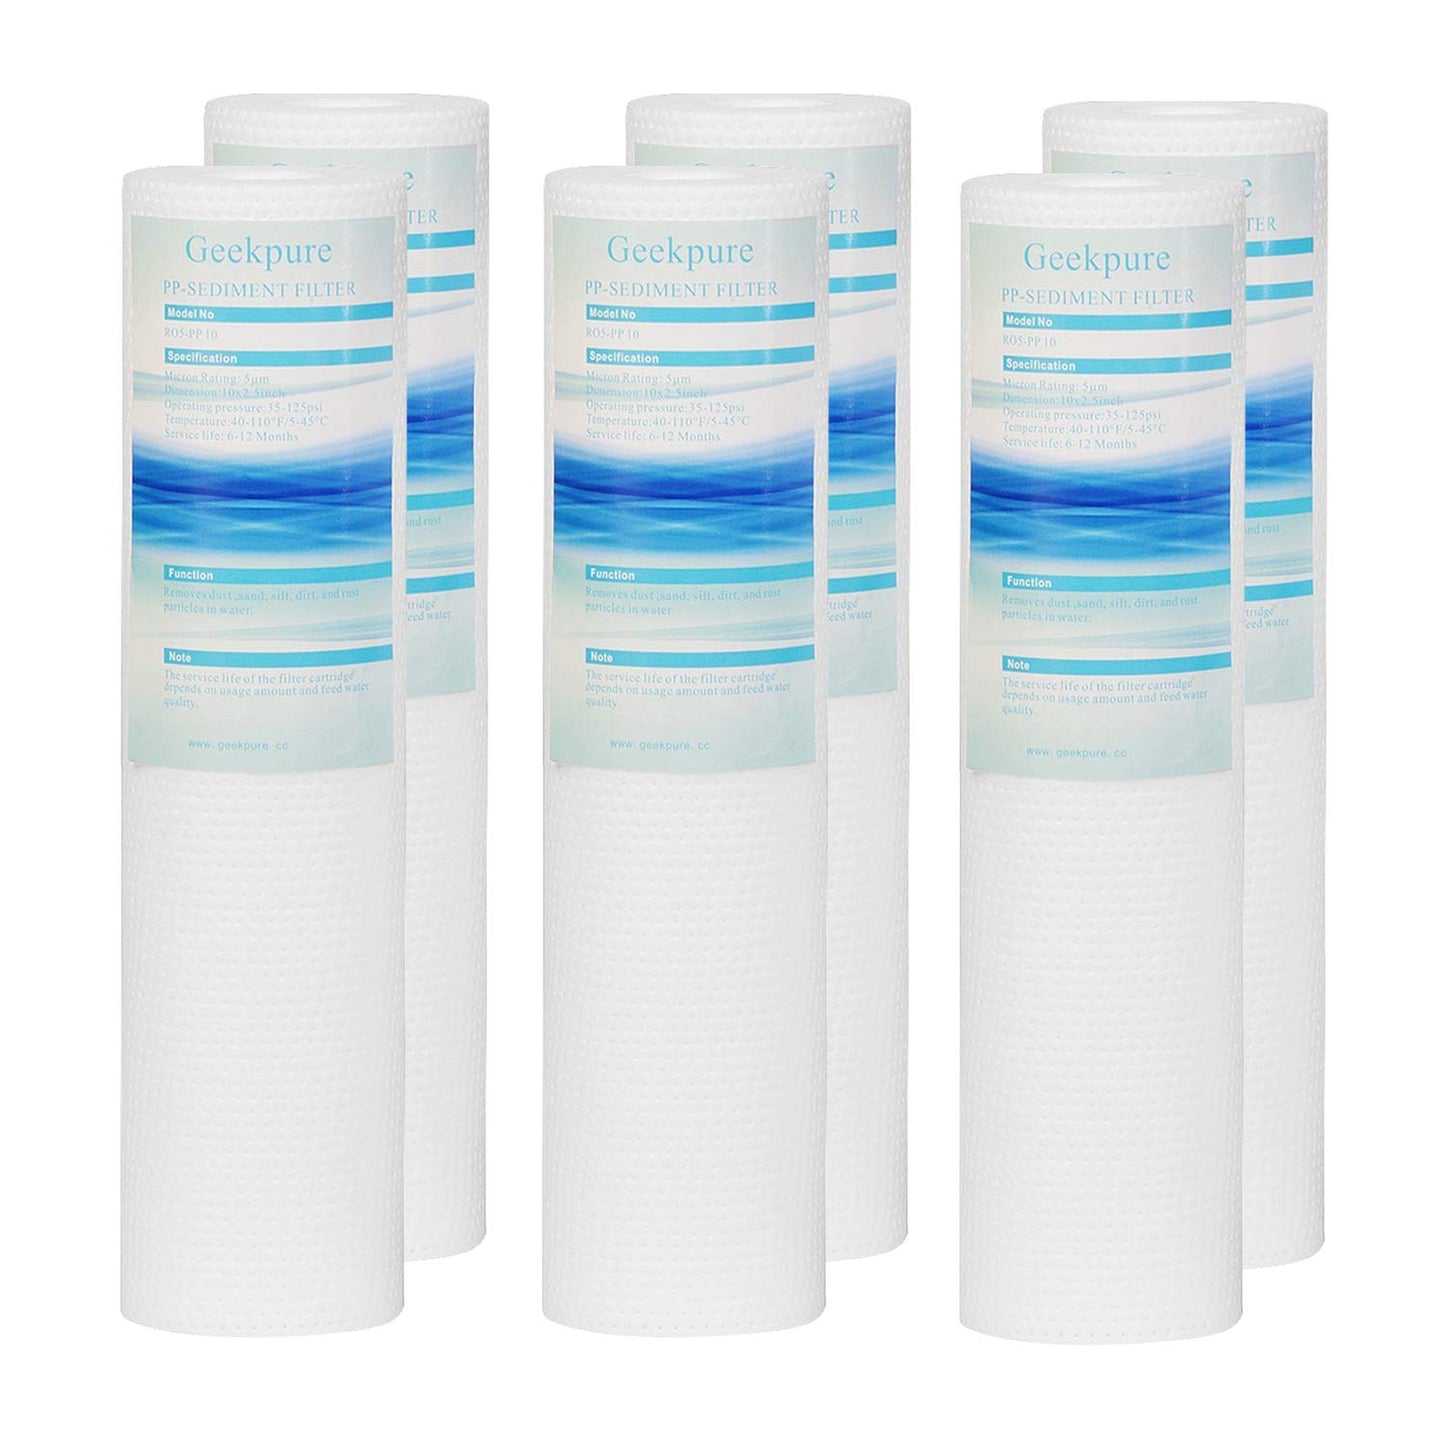 Replacement PP Sediment Polypropylene Filter Cartridge 2.5 " x 10 "-5 Micron -Pack of 6